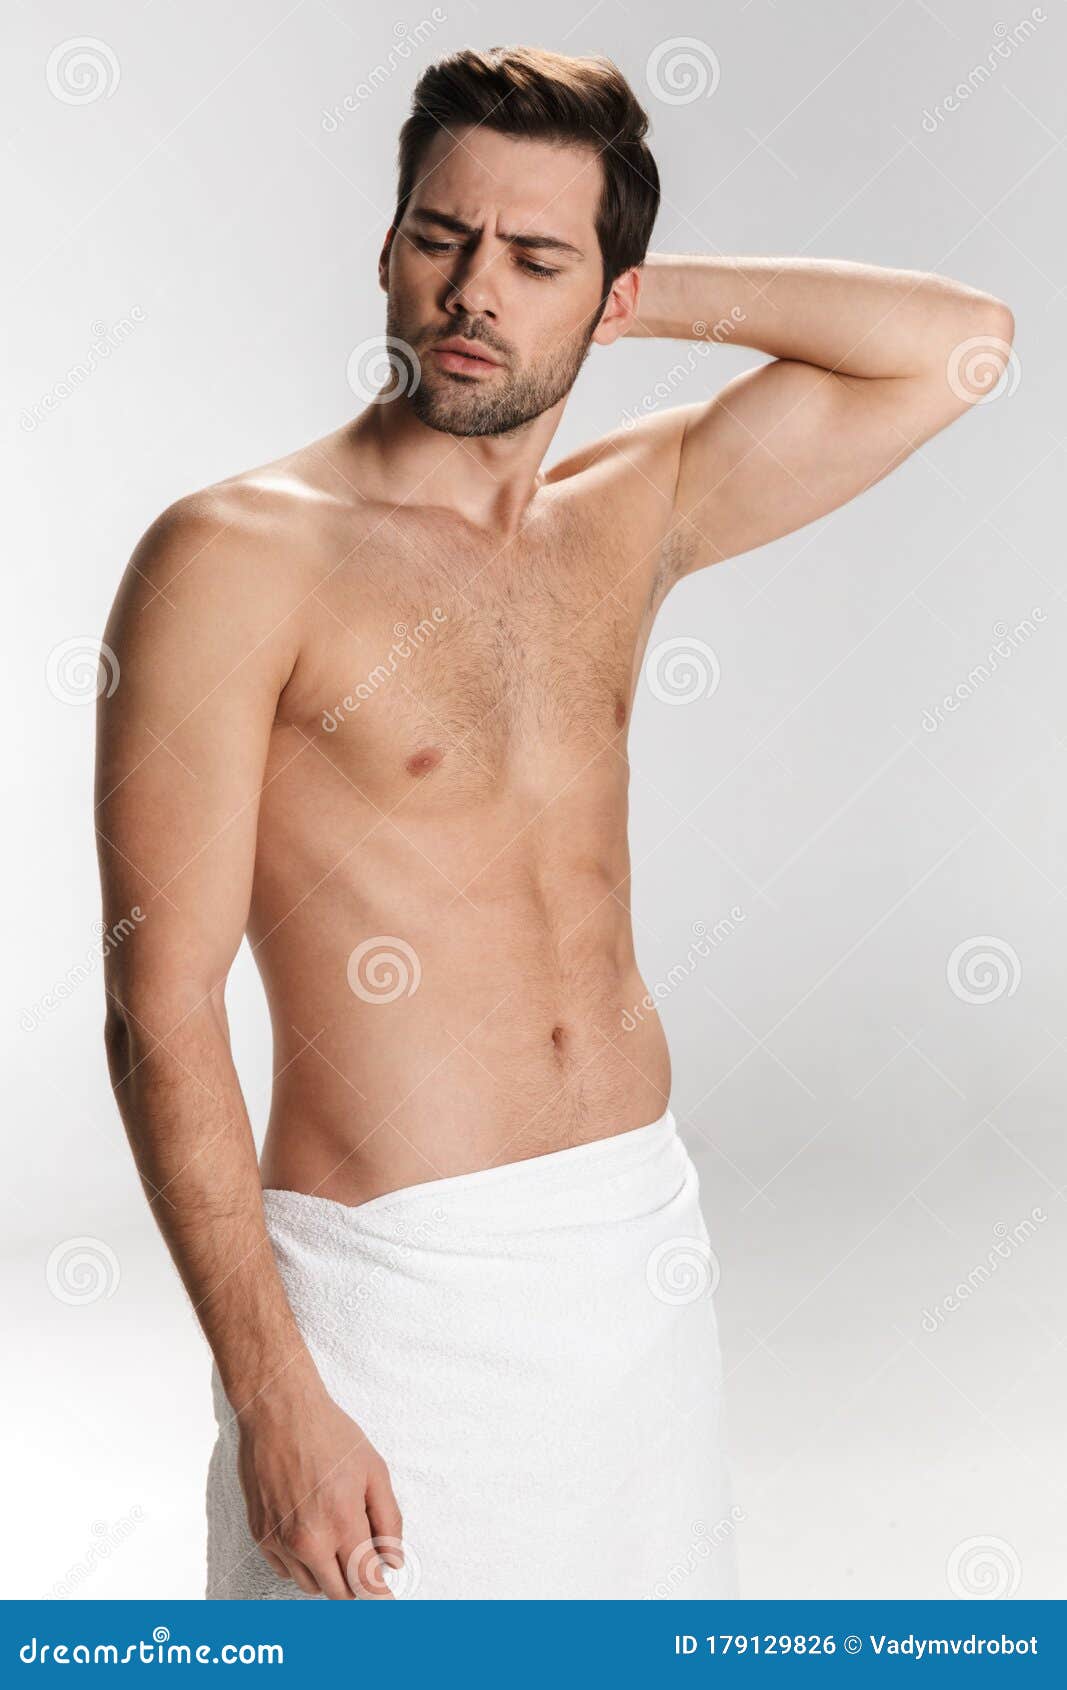 Photo Of Confused Half Naked Man Posing In Bath Towel Stock Photo